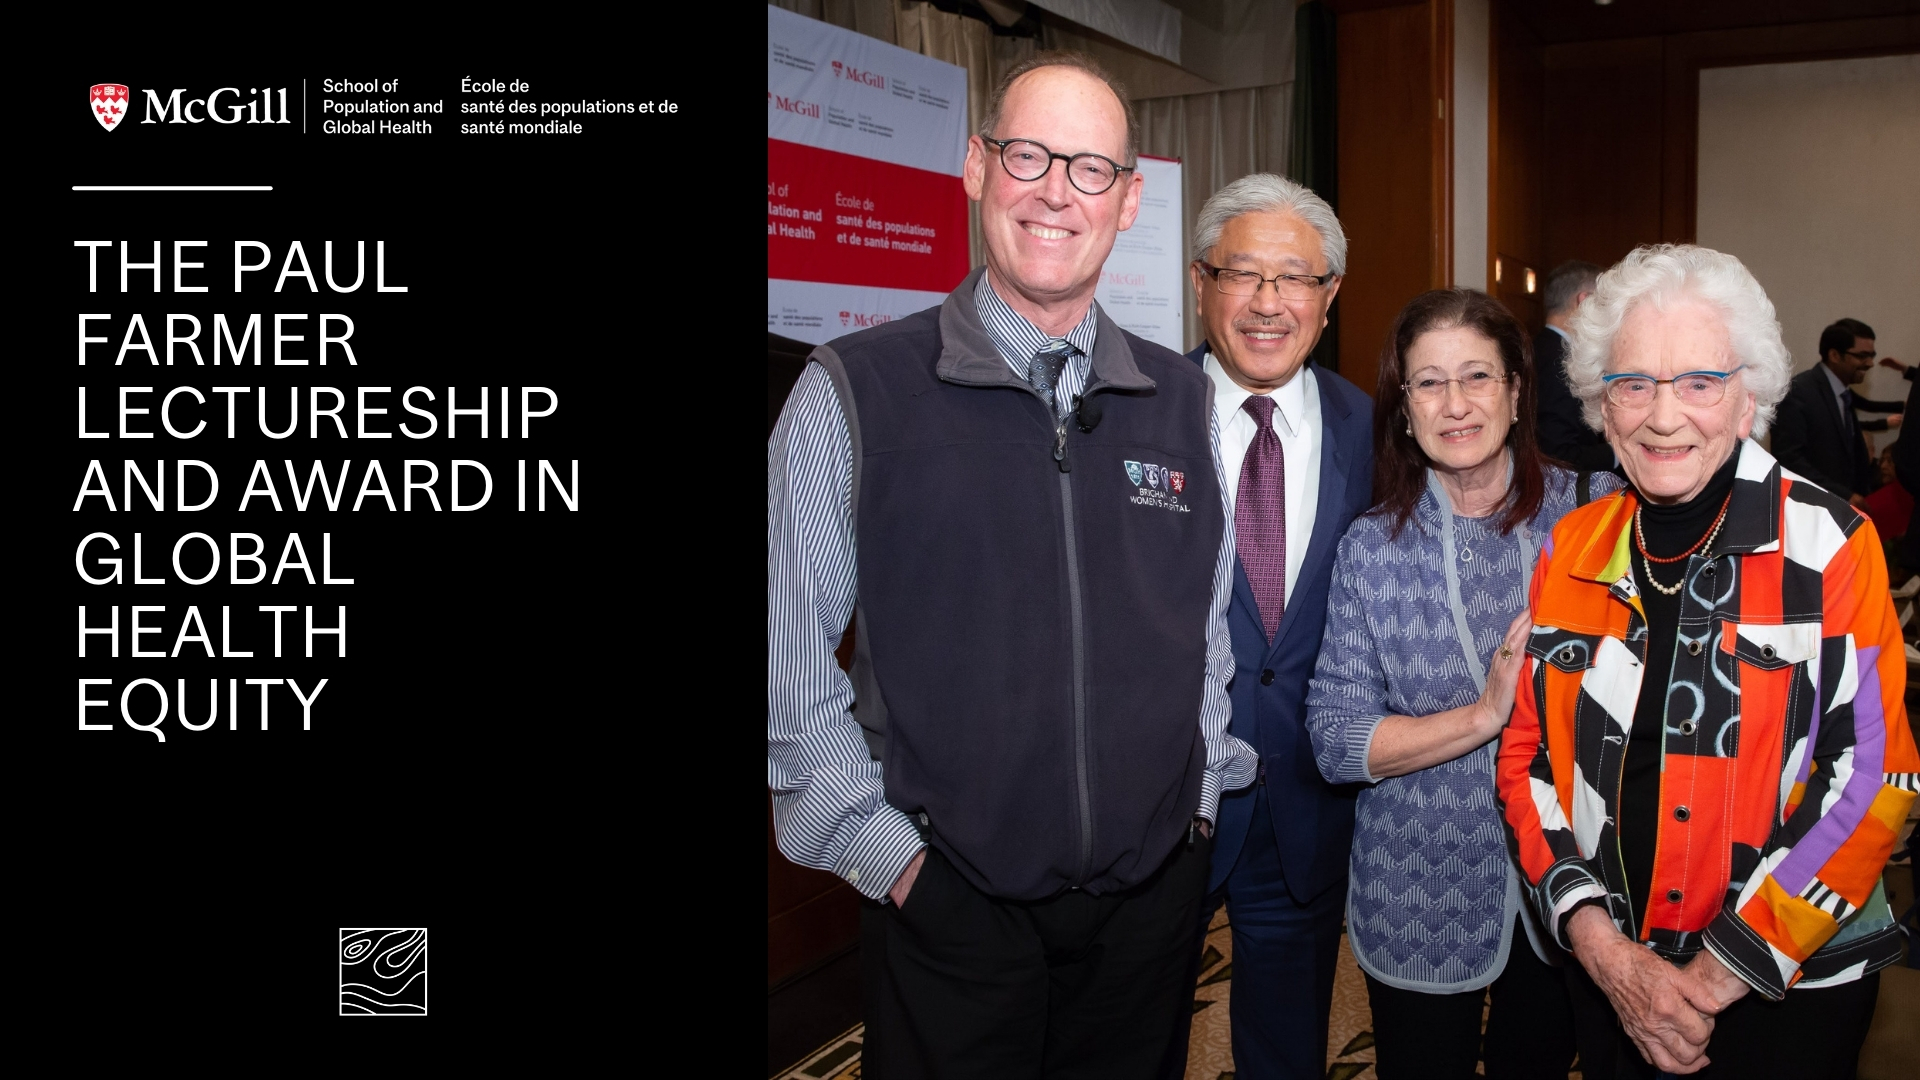 McGill: The Paul Farmer Lectureship and Award for Global Health Equity